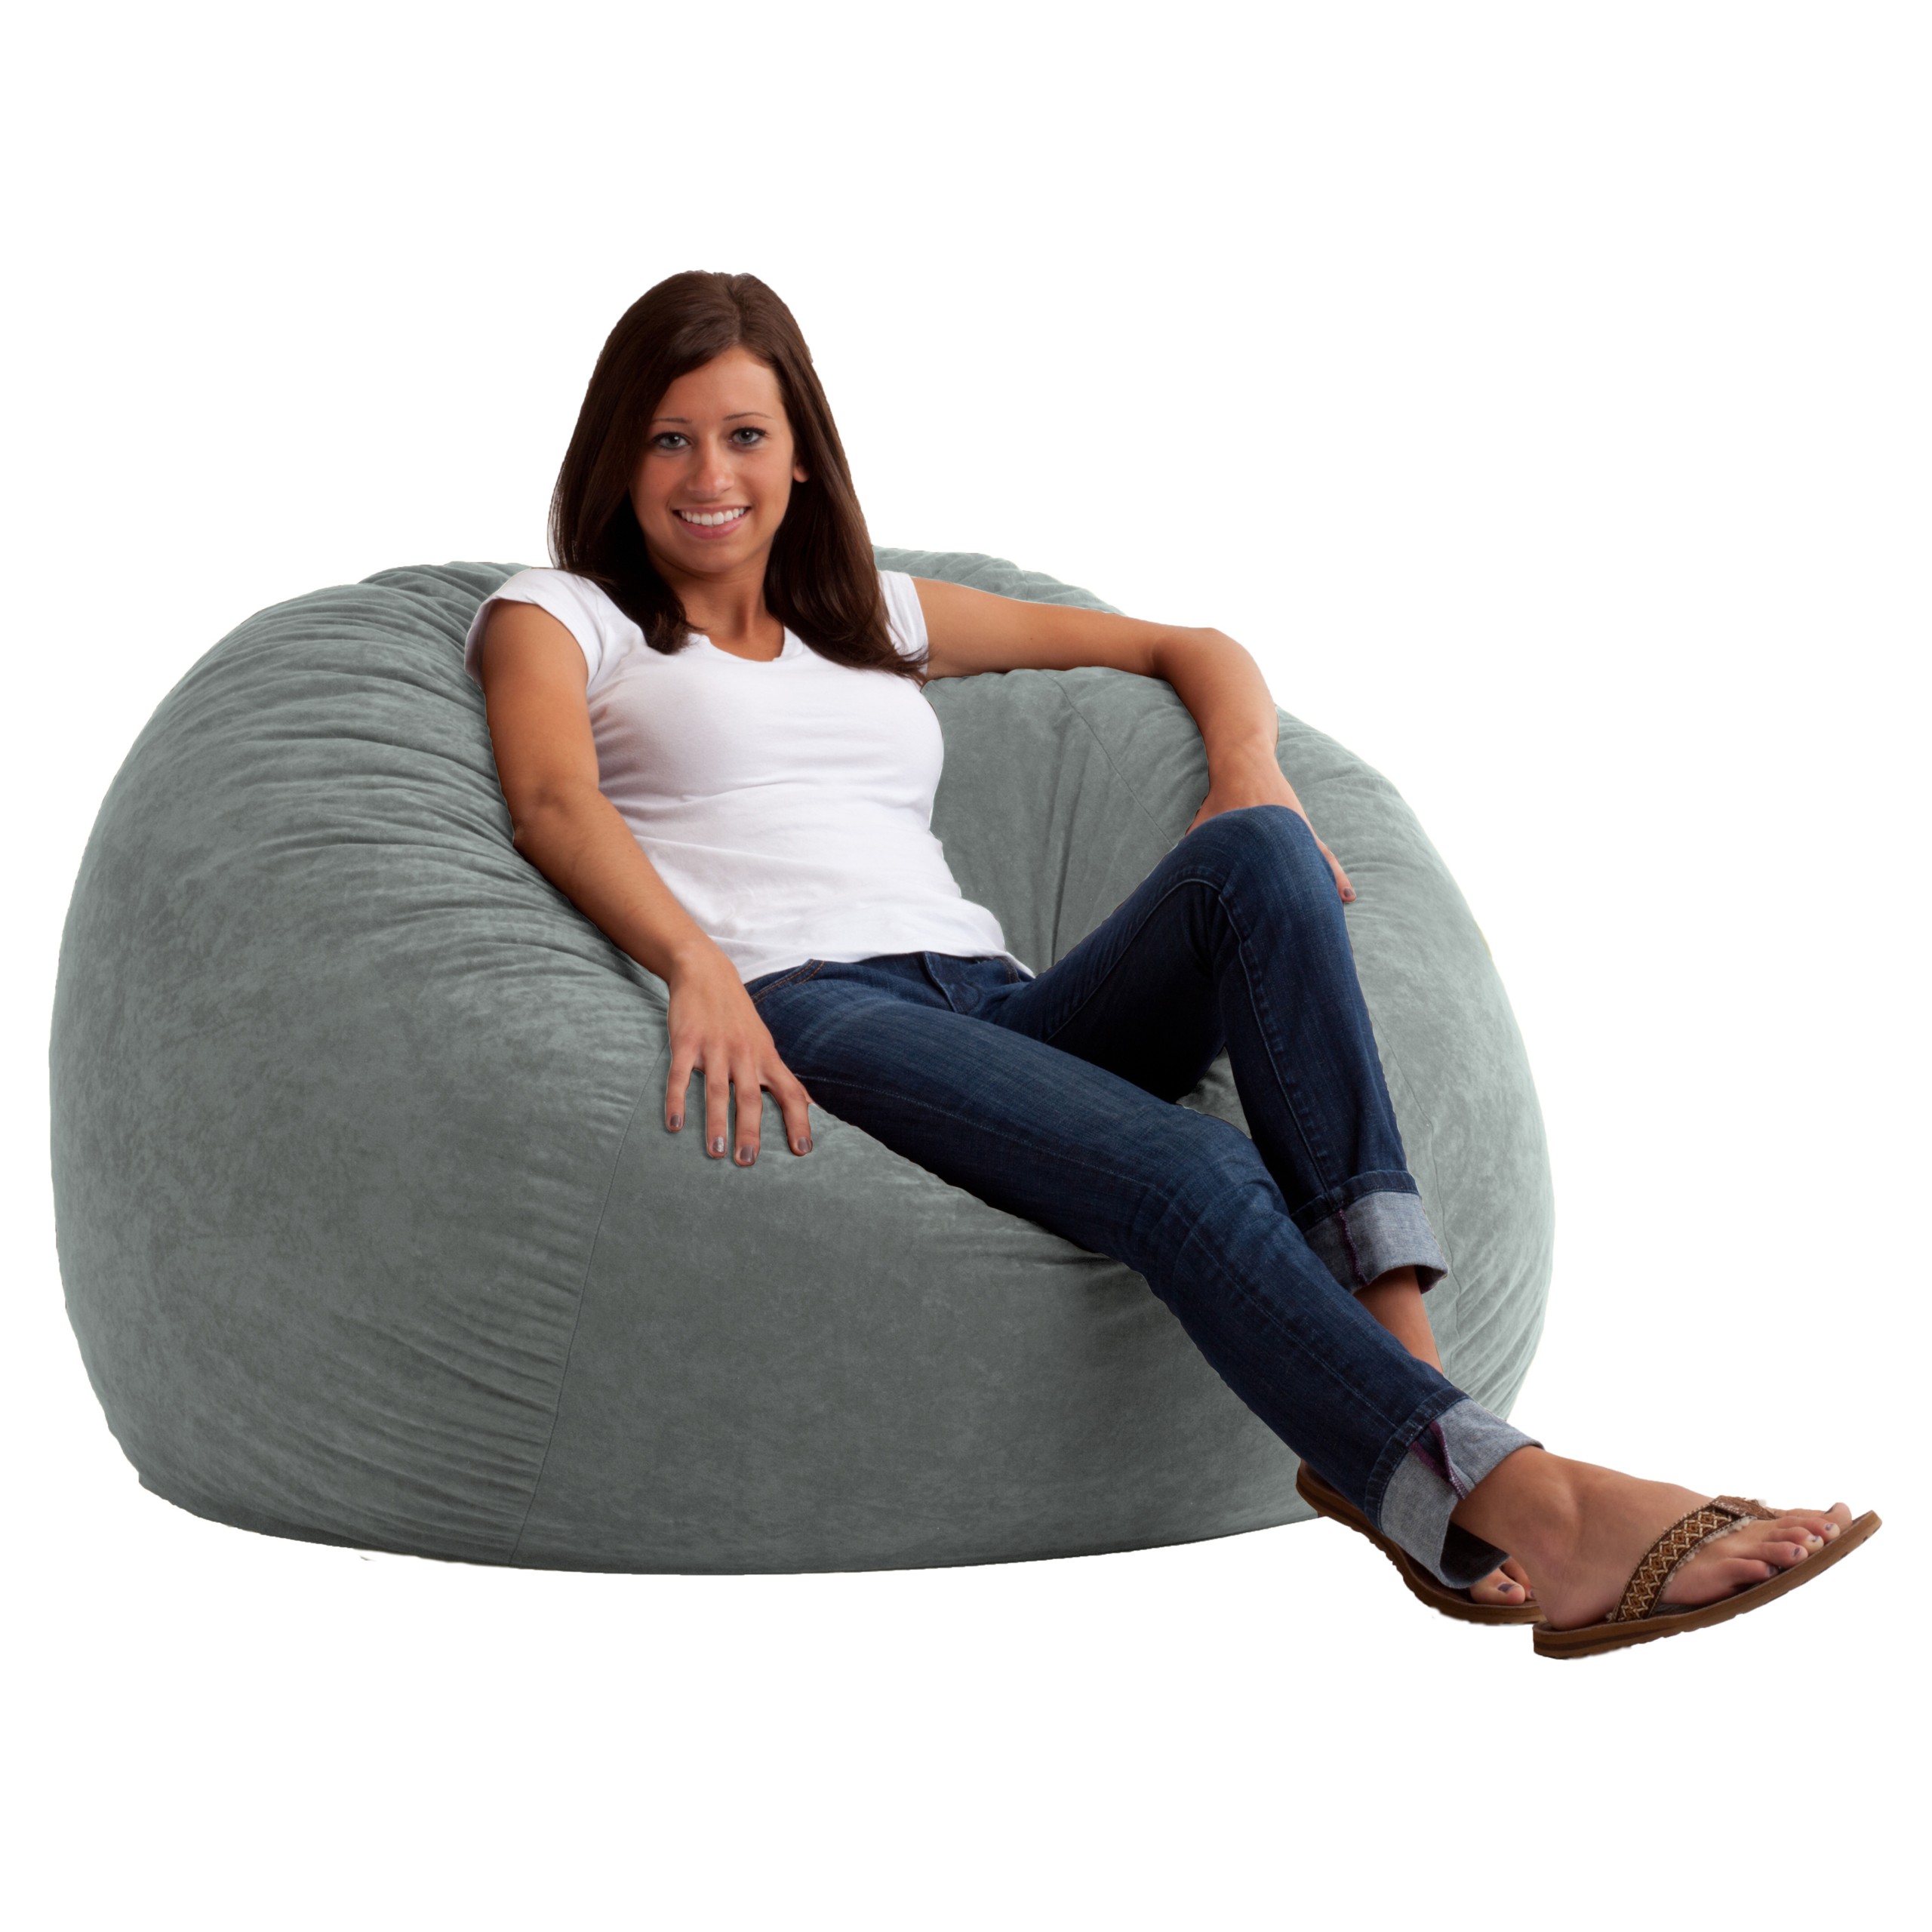 Large 4' Fuf Comfort Suede Bean Bag Chair Black Onyx - Soft Durable Comfortable Seating for Everyday Use